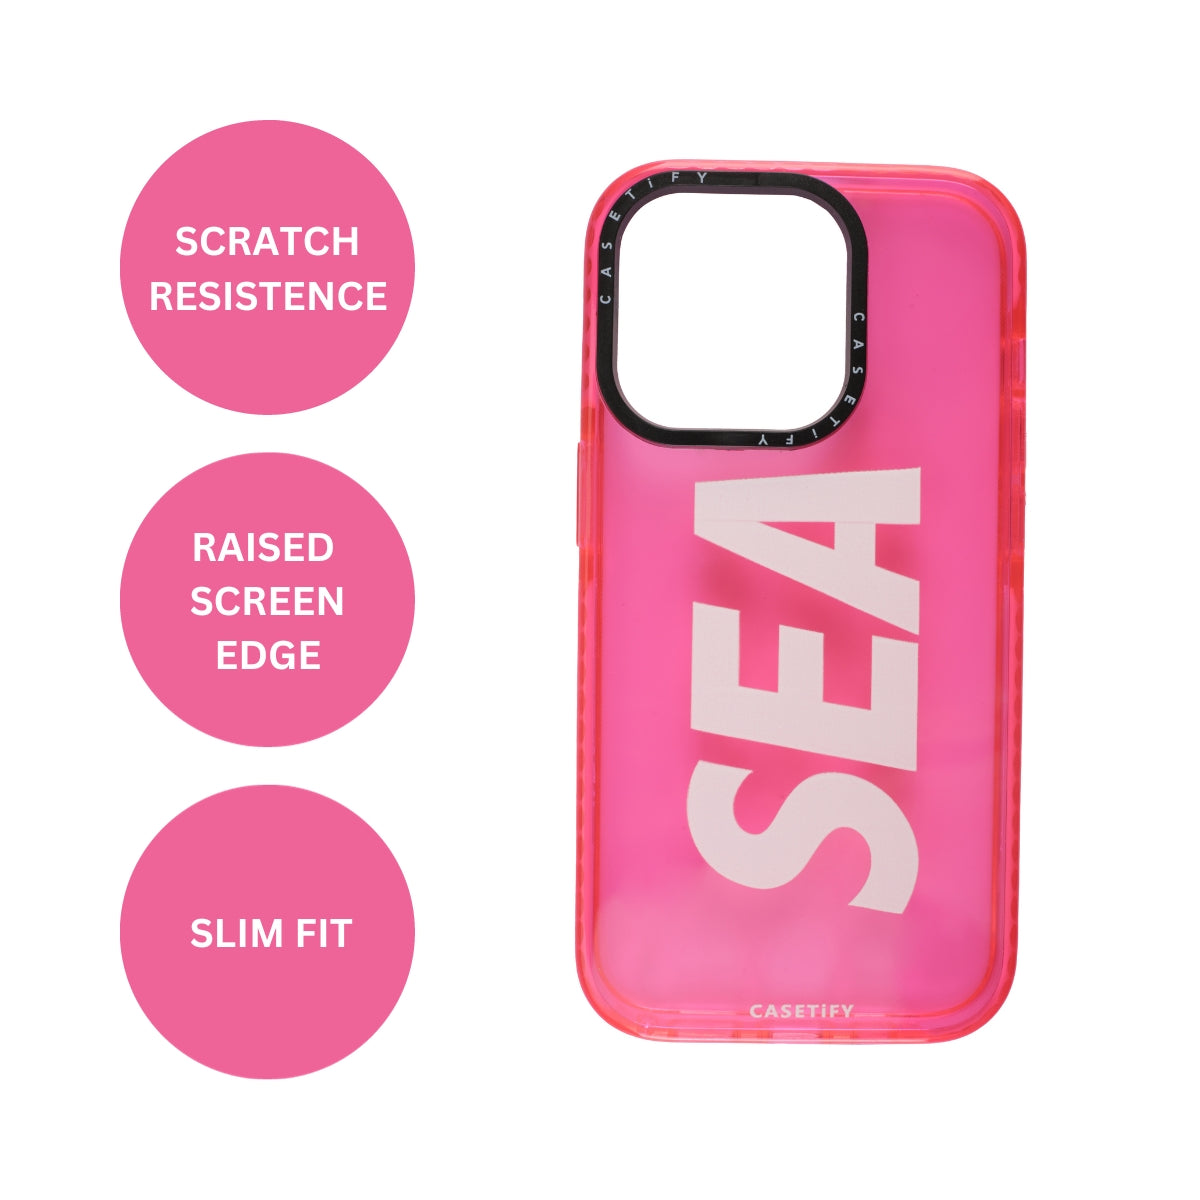 Nypsun Sea Case Camera and Drop Protection Thin Protective Clear Back Cover Case Pink Colour